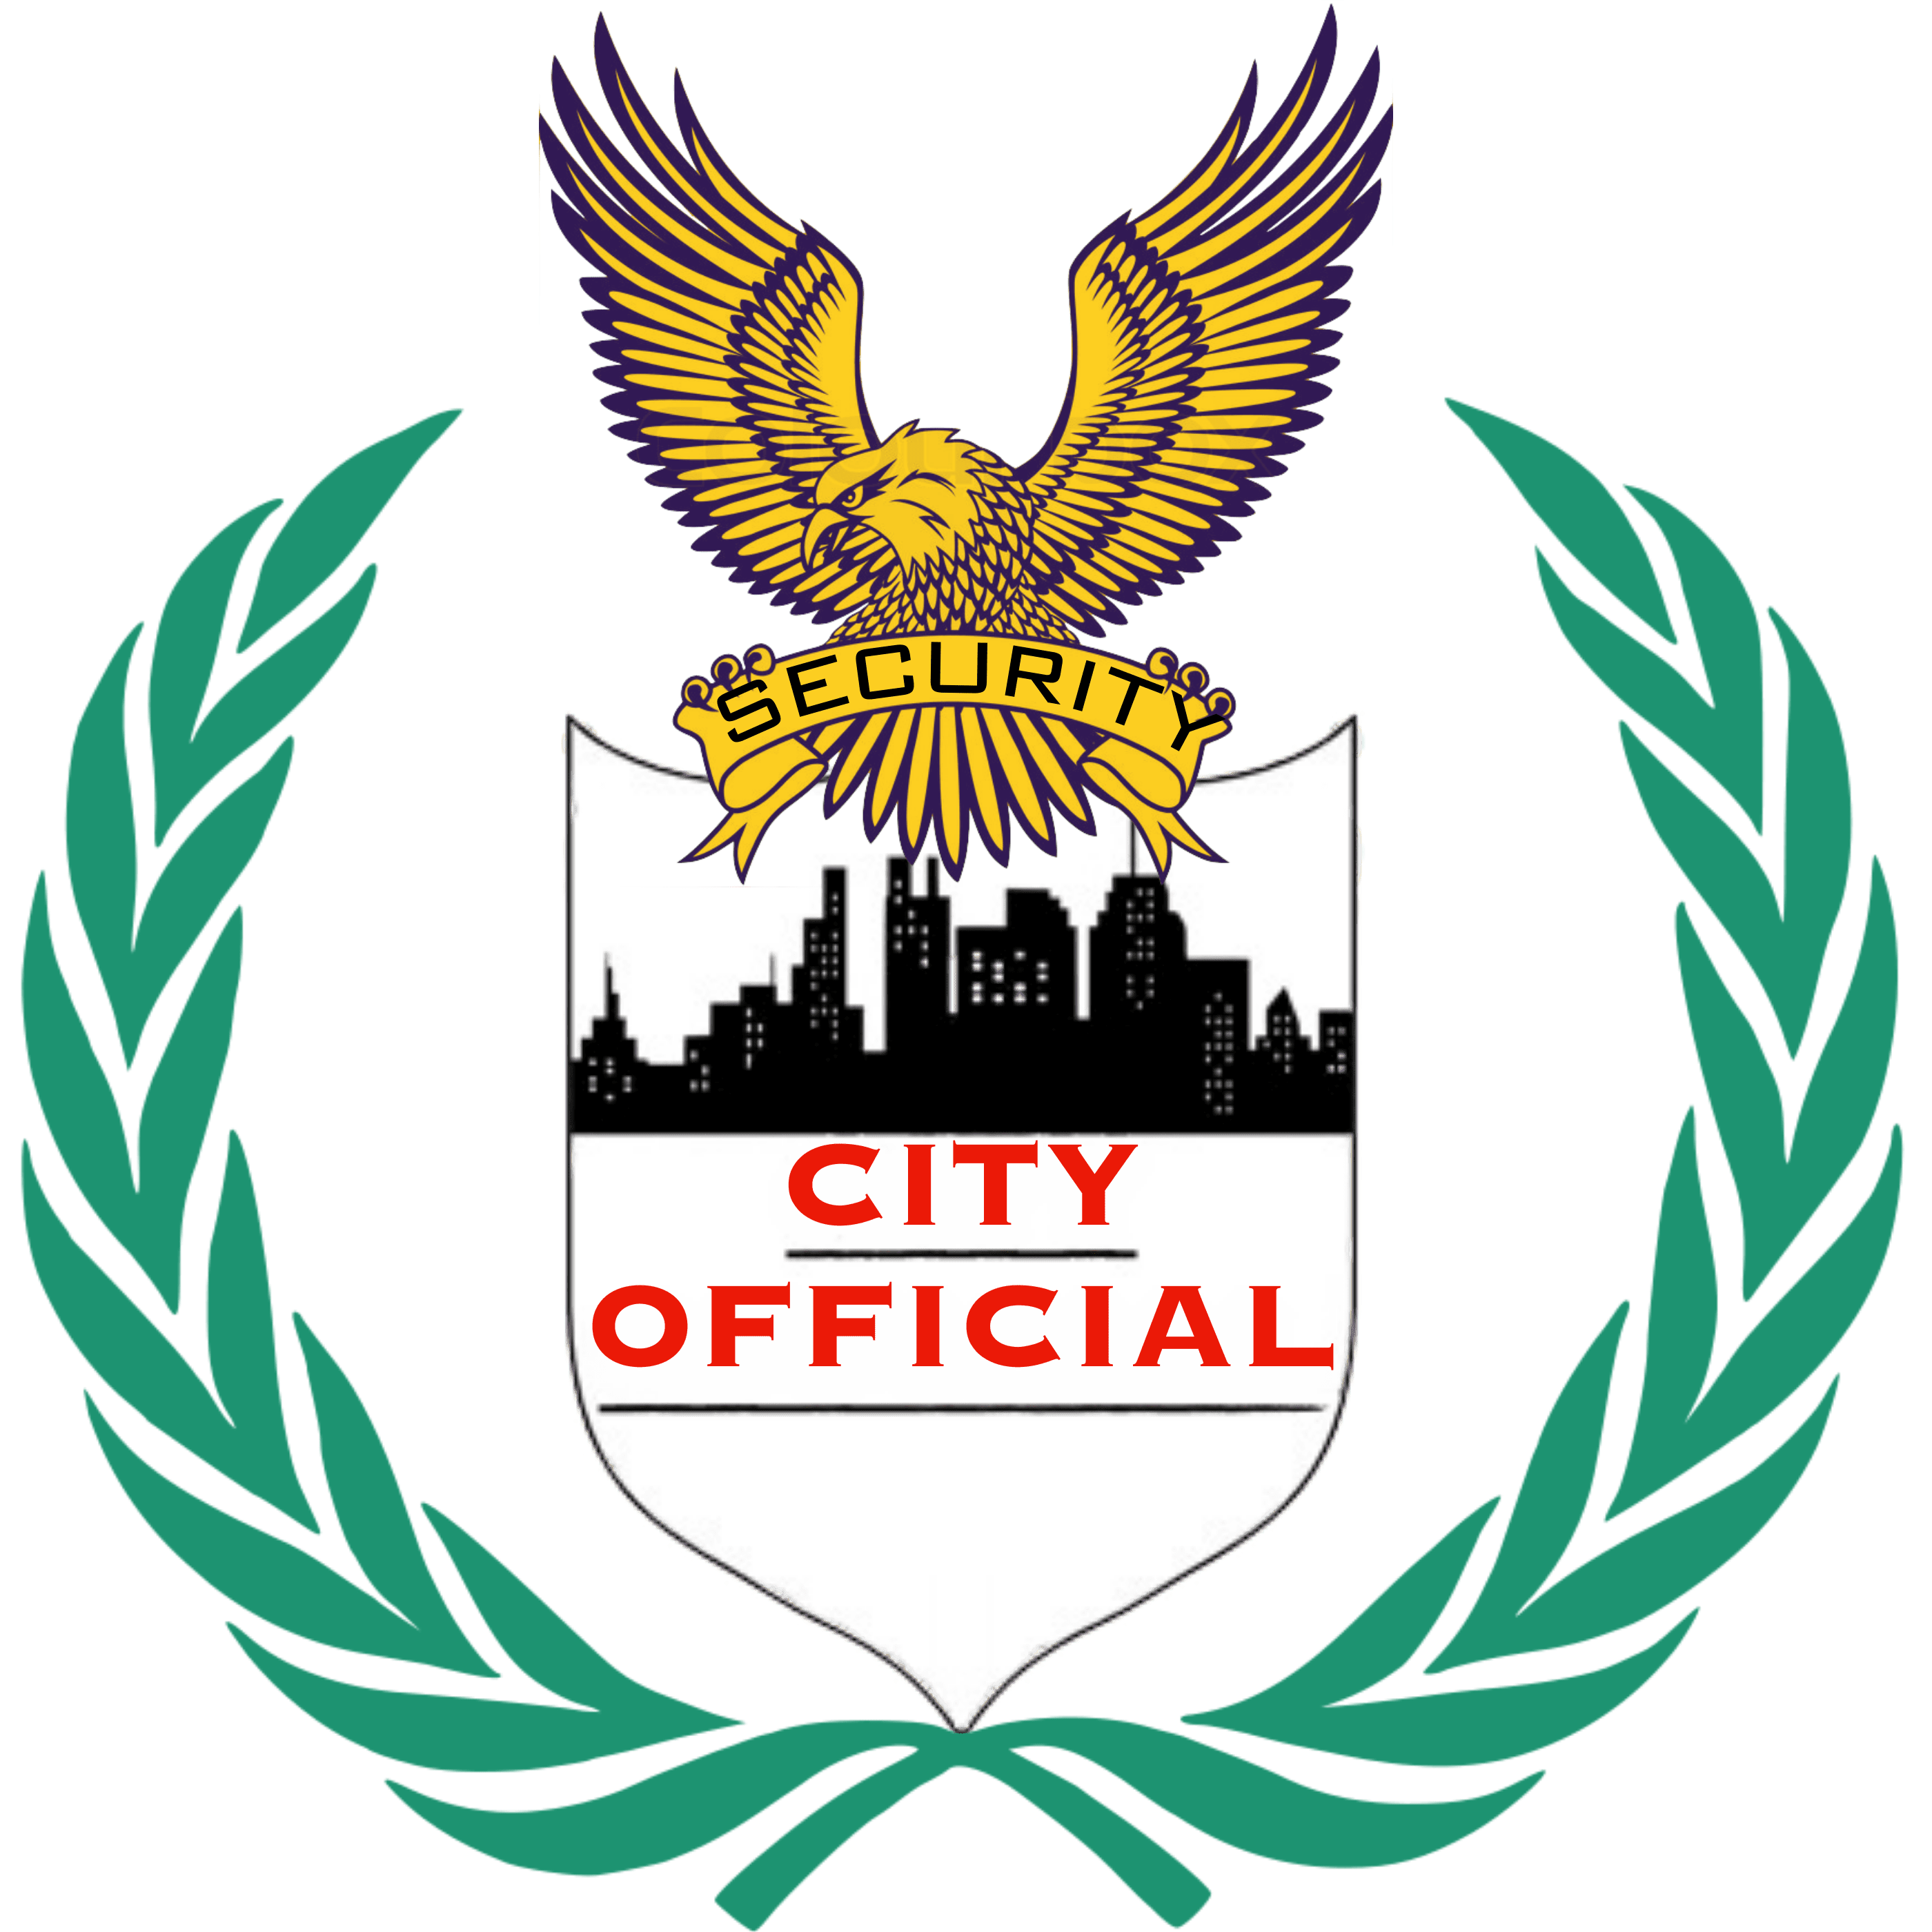 CITY OFFICIAL SECURITY